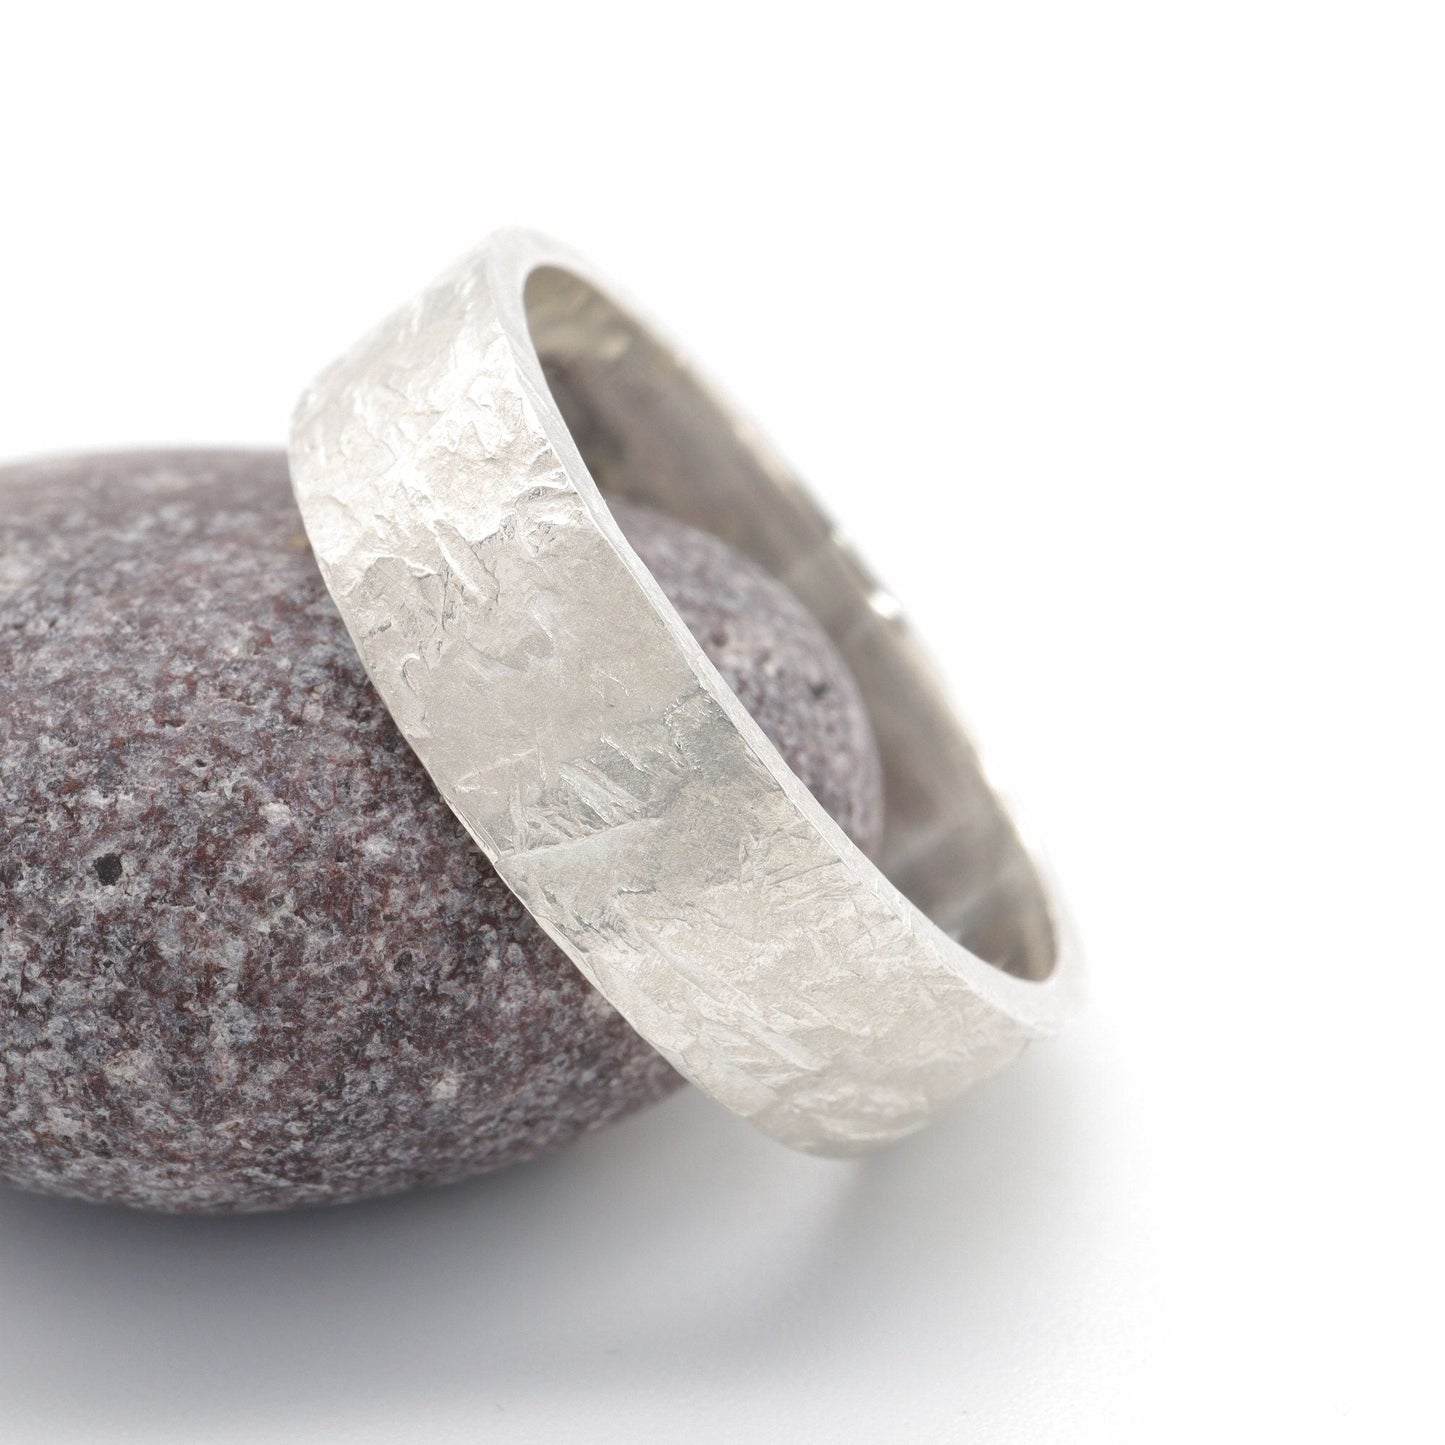 Silver broad mens promise ring - rustic flat hammered textured commitment band - Windermere design.